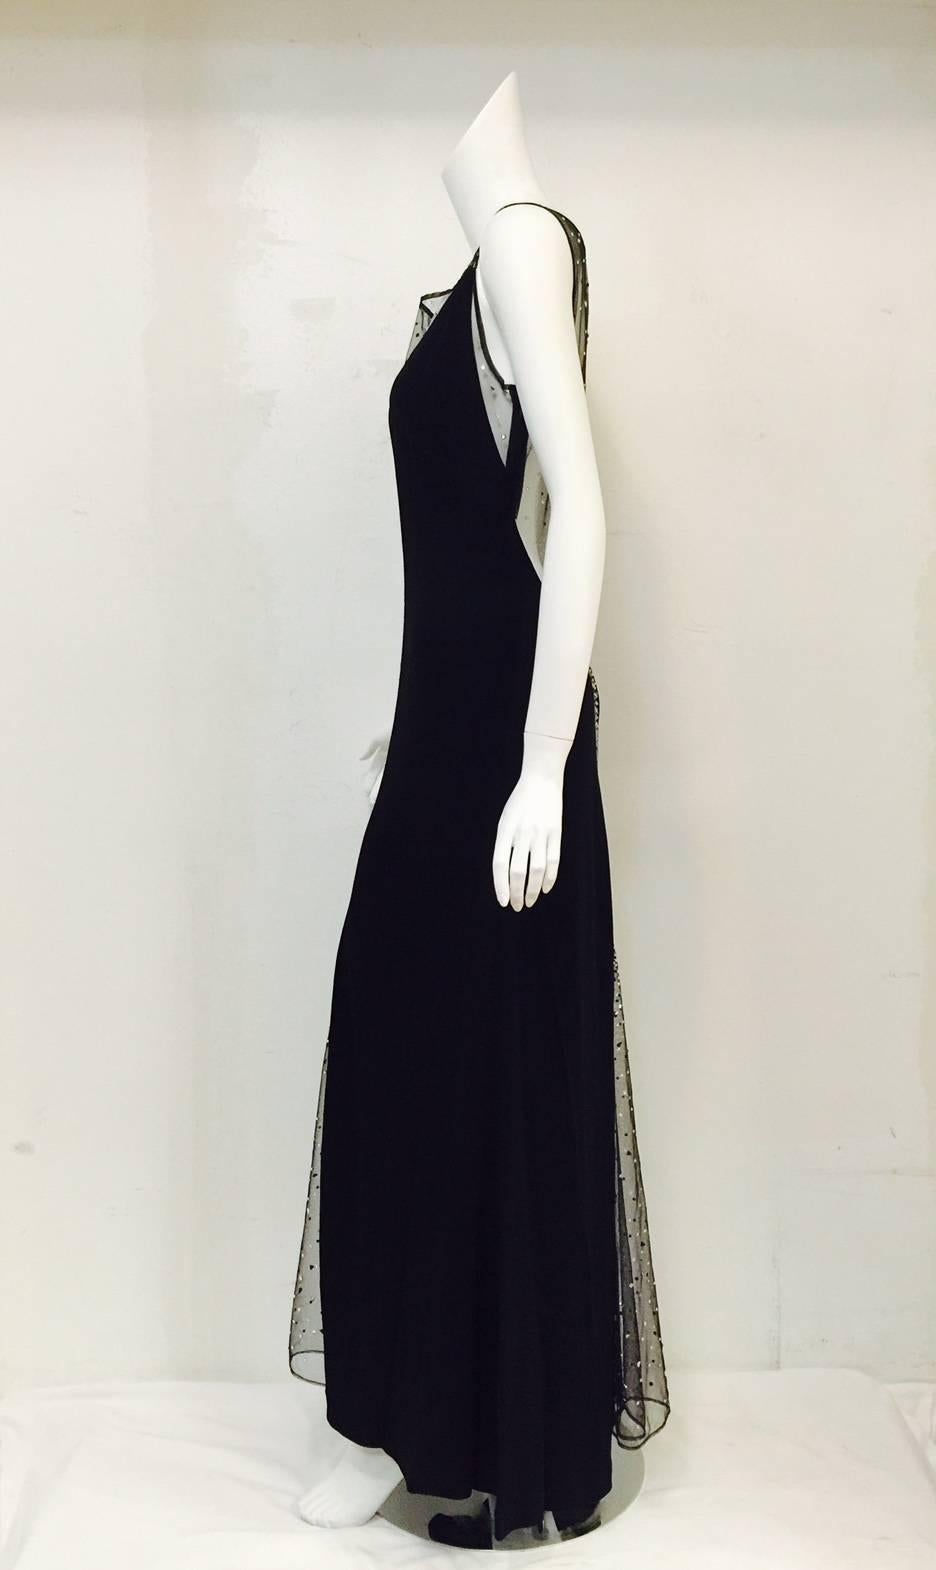 Make a statement without saying a word!  This Jiki Swarovski Crystal Embellished Black Evening Dress is sure to command the red carpet and generate 